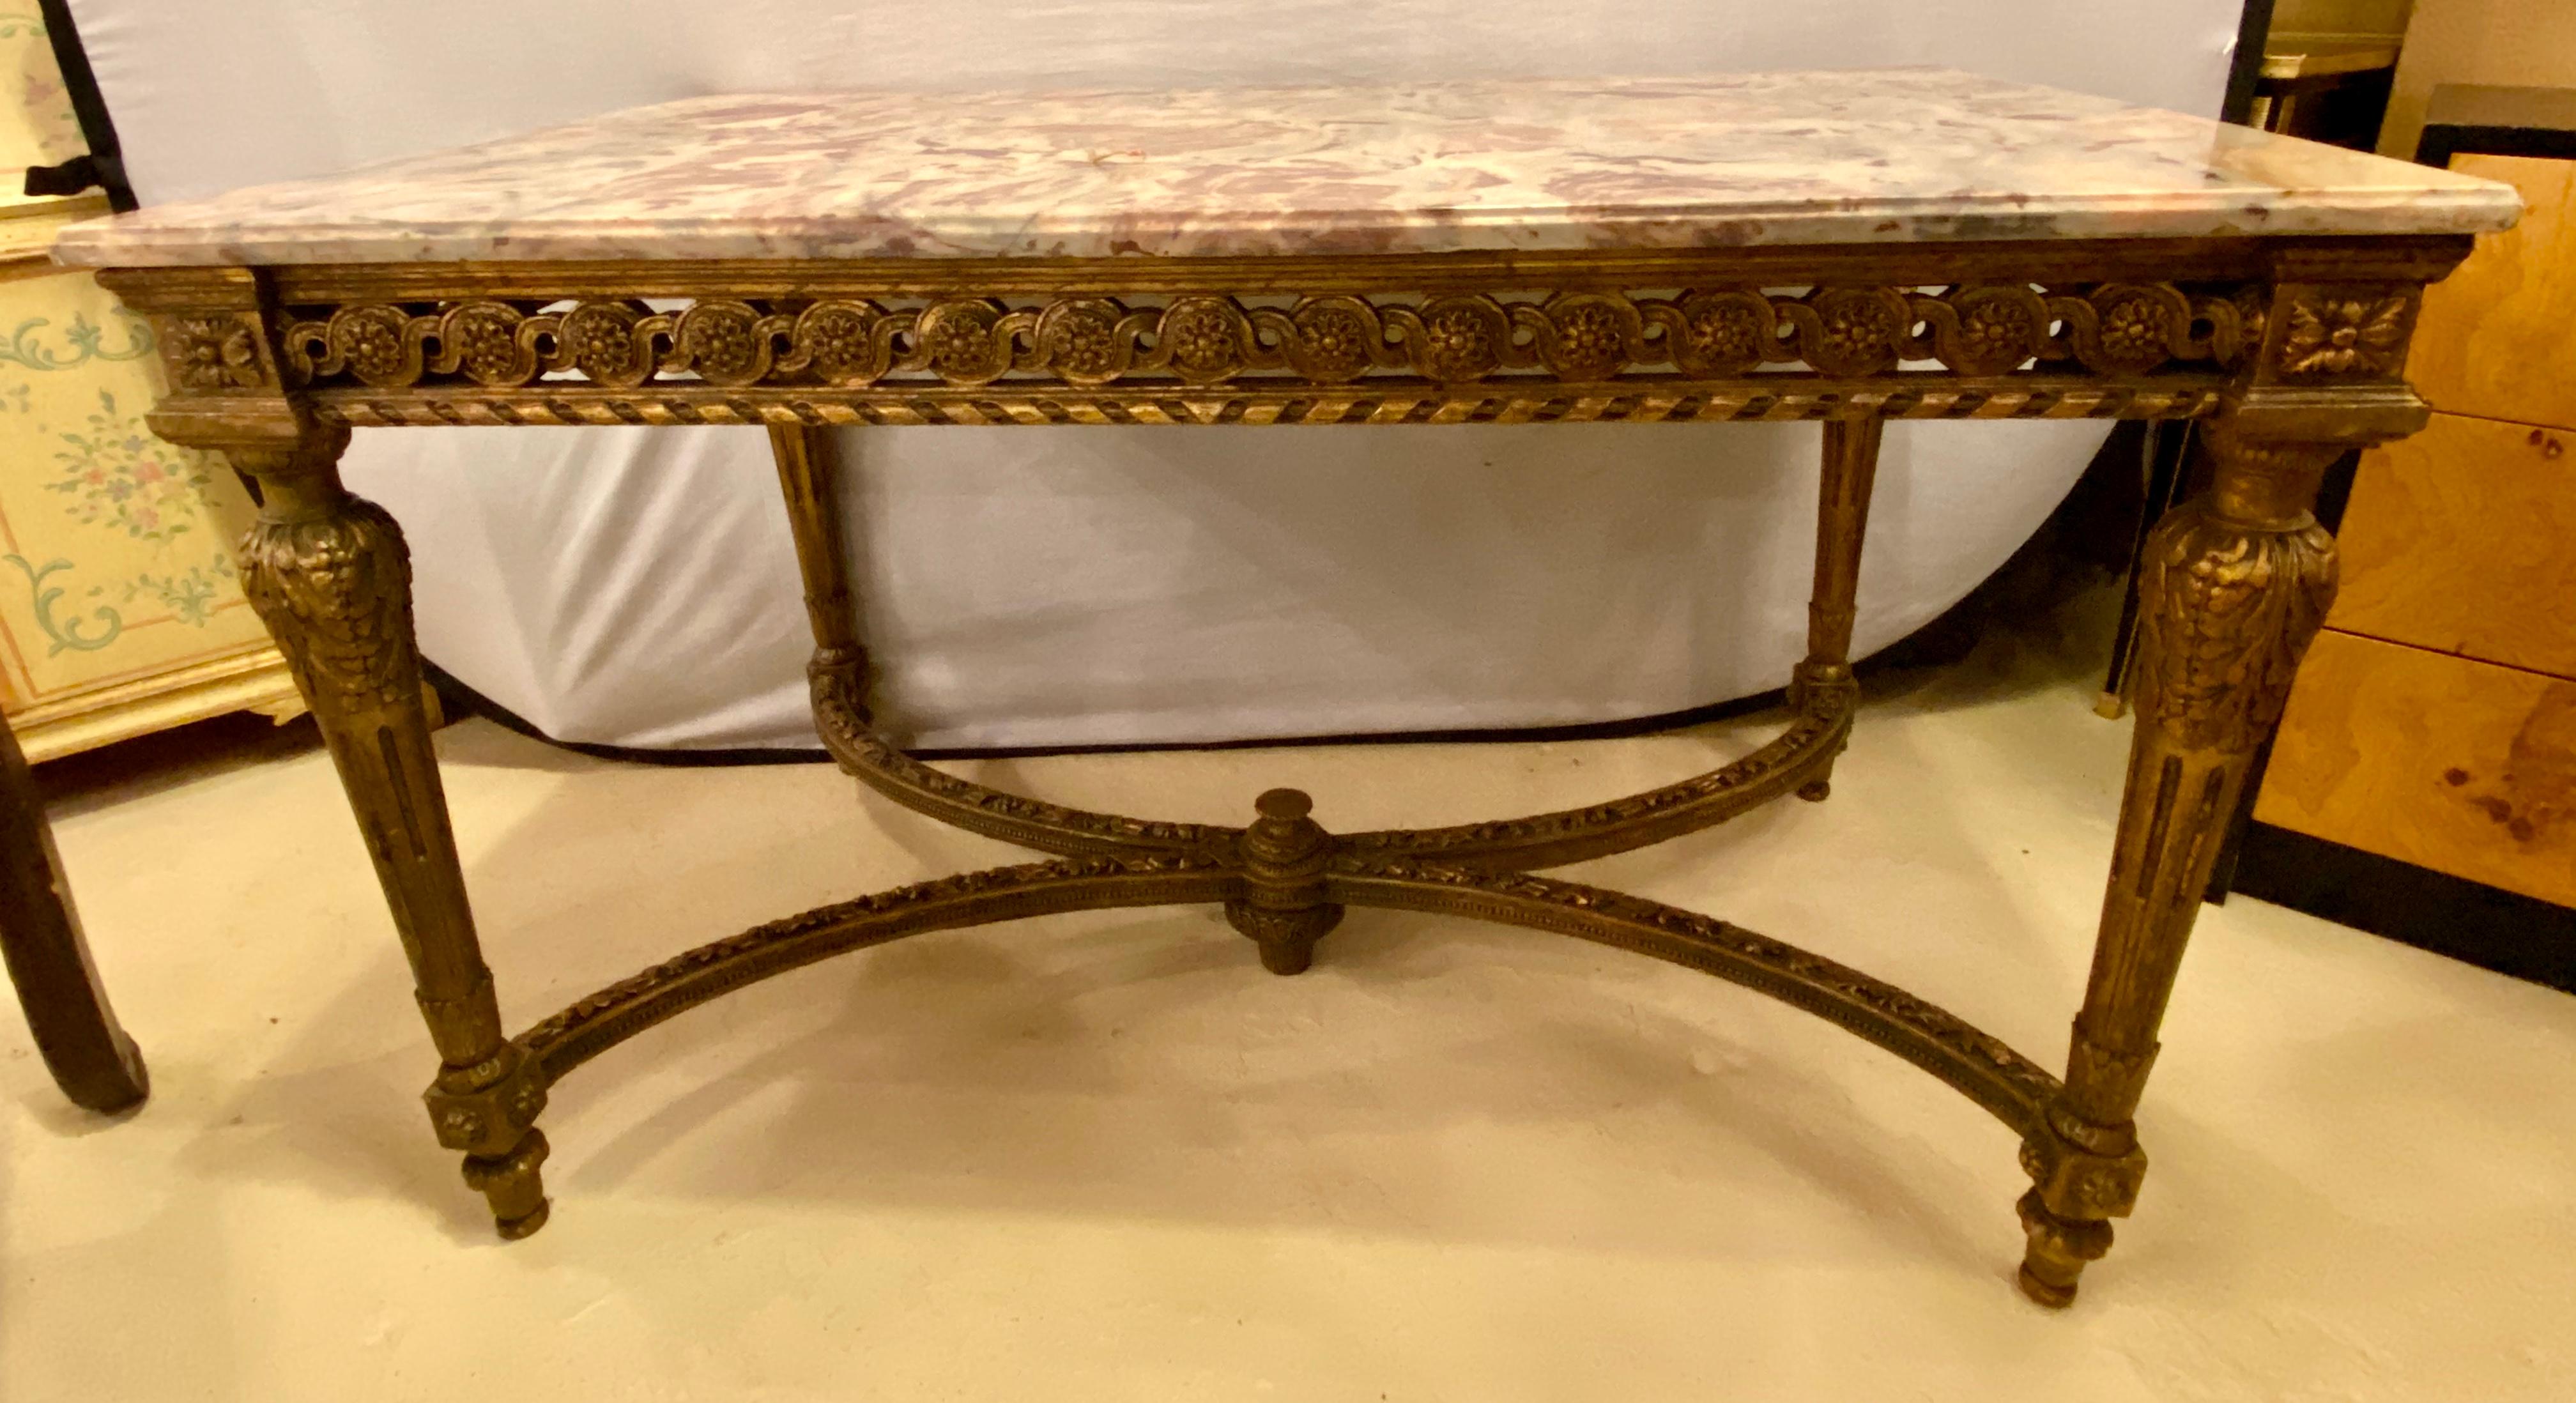 Stamped Jansen center table having a gilt base and fine pink, grey and white veined marble-top. The top having been professionally repaired. The Louis XVI style center table having been antique guided. The four corner legs supported by X-form carved